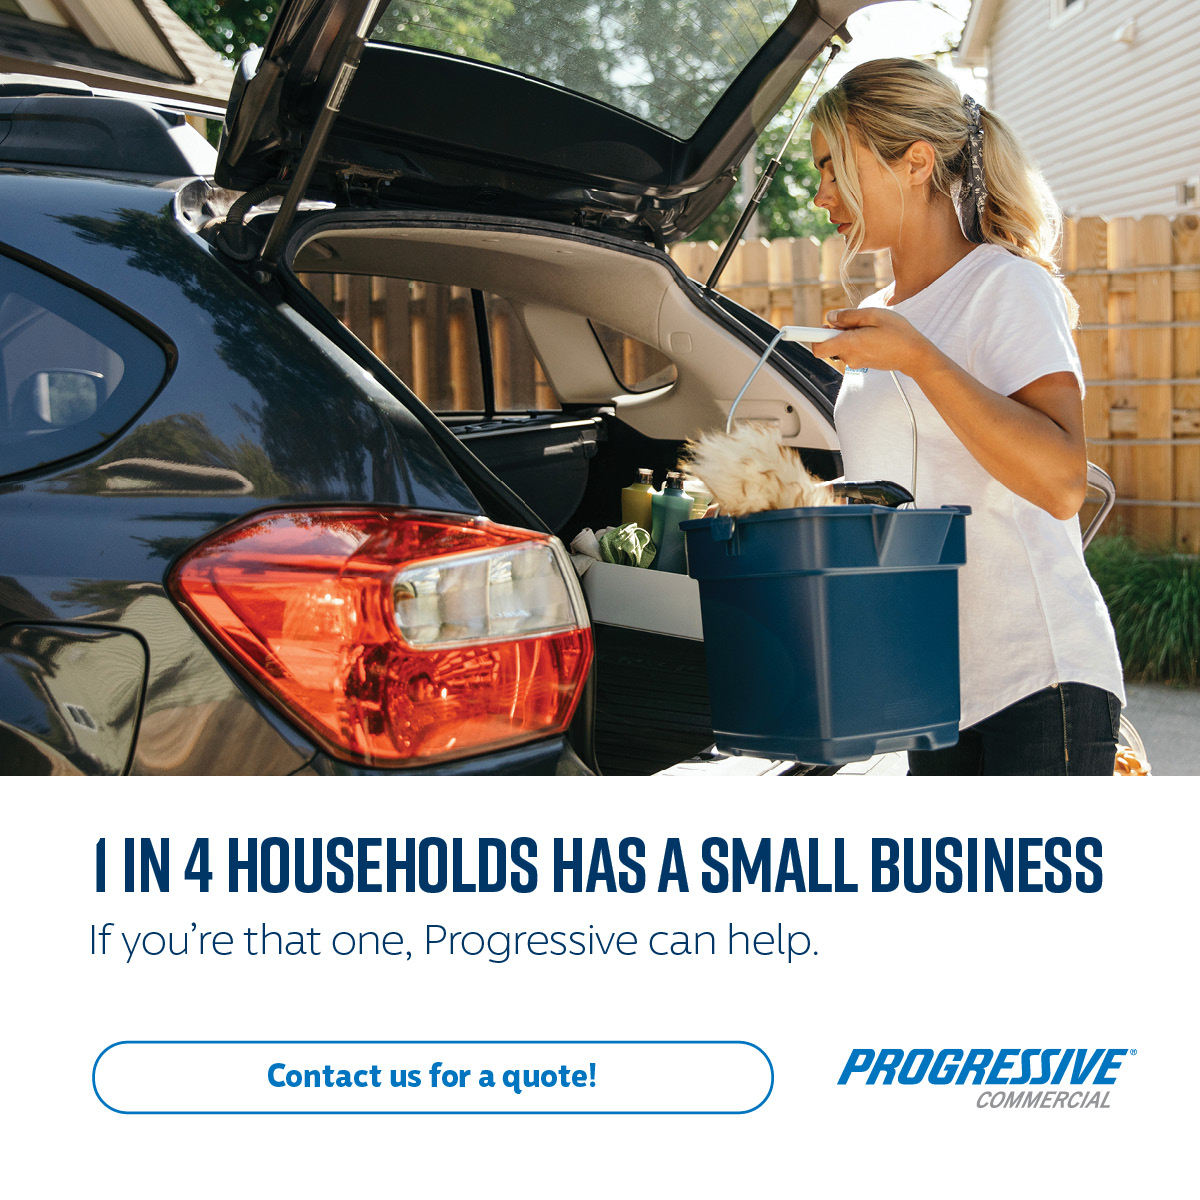 If you or a friend own a small business, we’re here for you! Ask us about Progressive Commercial insurance today.

#pgragent, #smallbusiness, #needcommercialauto, #commercialauto, #BrittanyOlsonInsurance, #InsureTomorrowToday